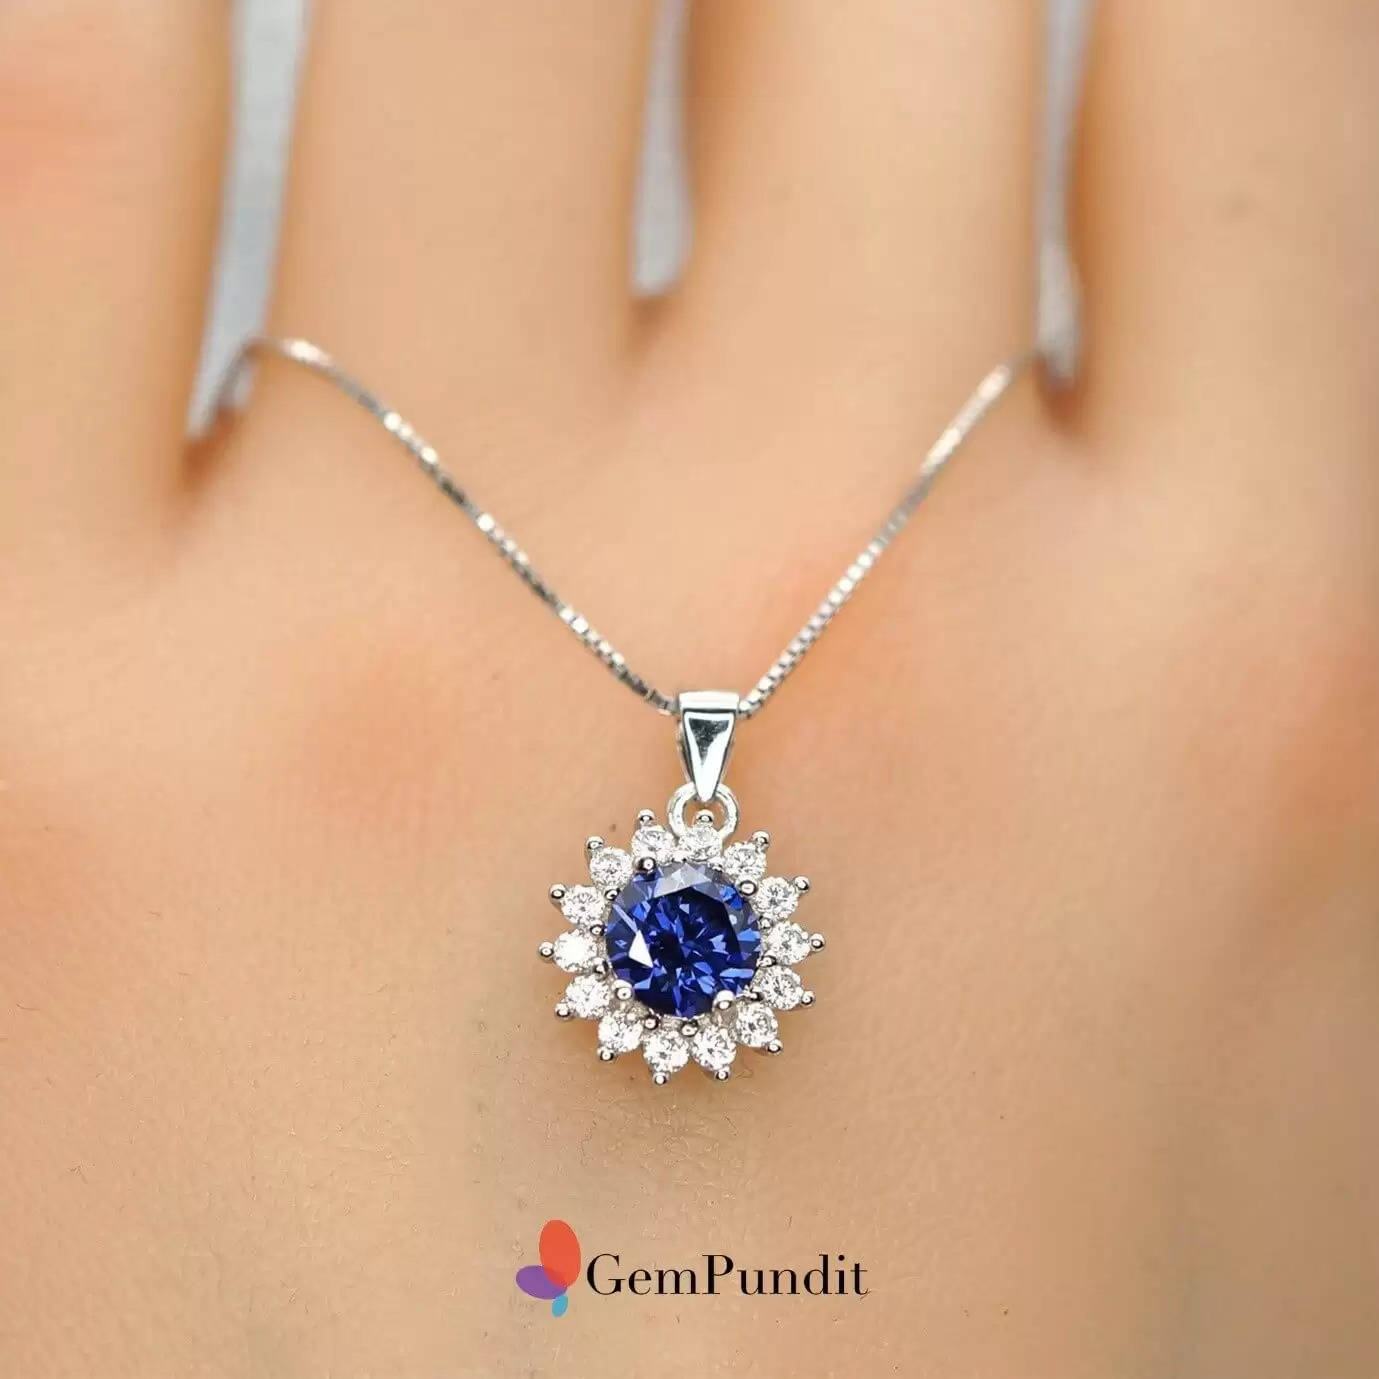 How To Model Your Blue Sapphire Jewellery For Each Event